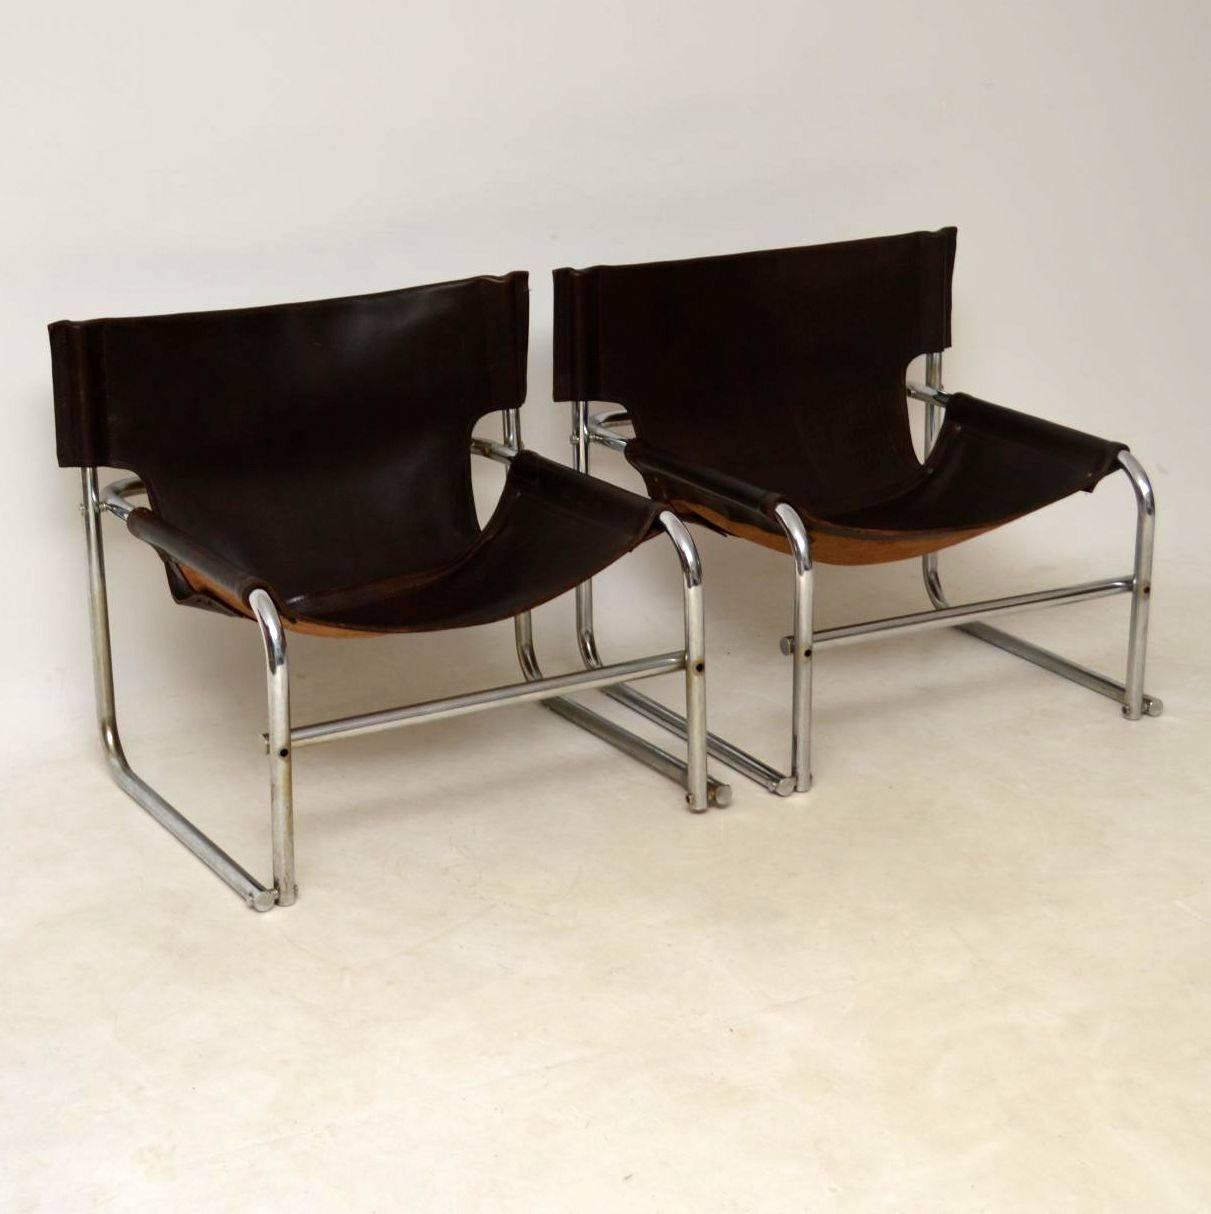 English 1960s Steel and Leather Pair of Armchairs, T1 by Rodney Kinsman for OMK